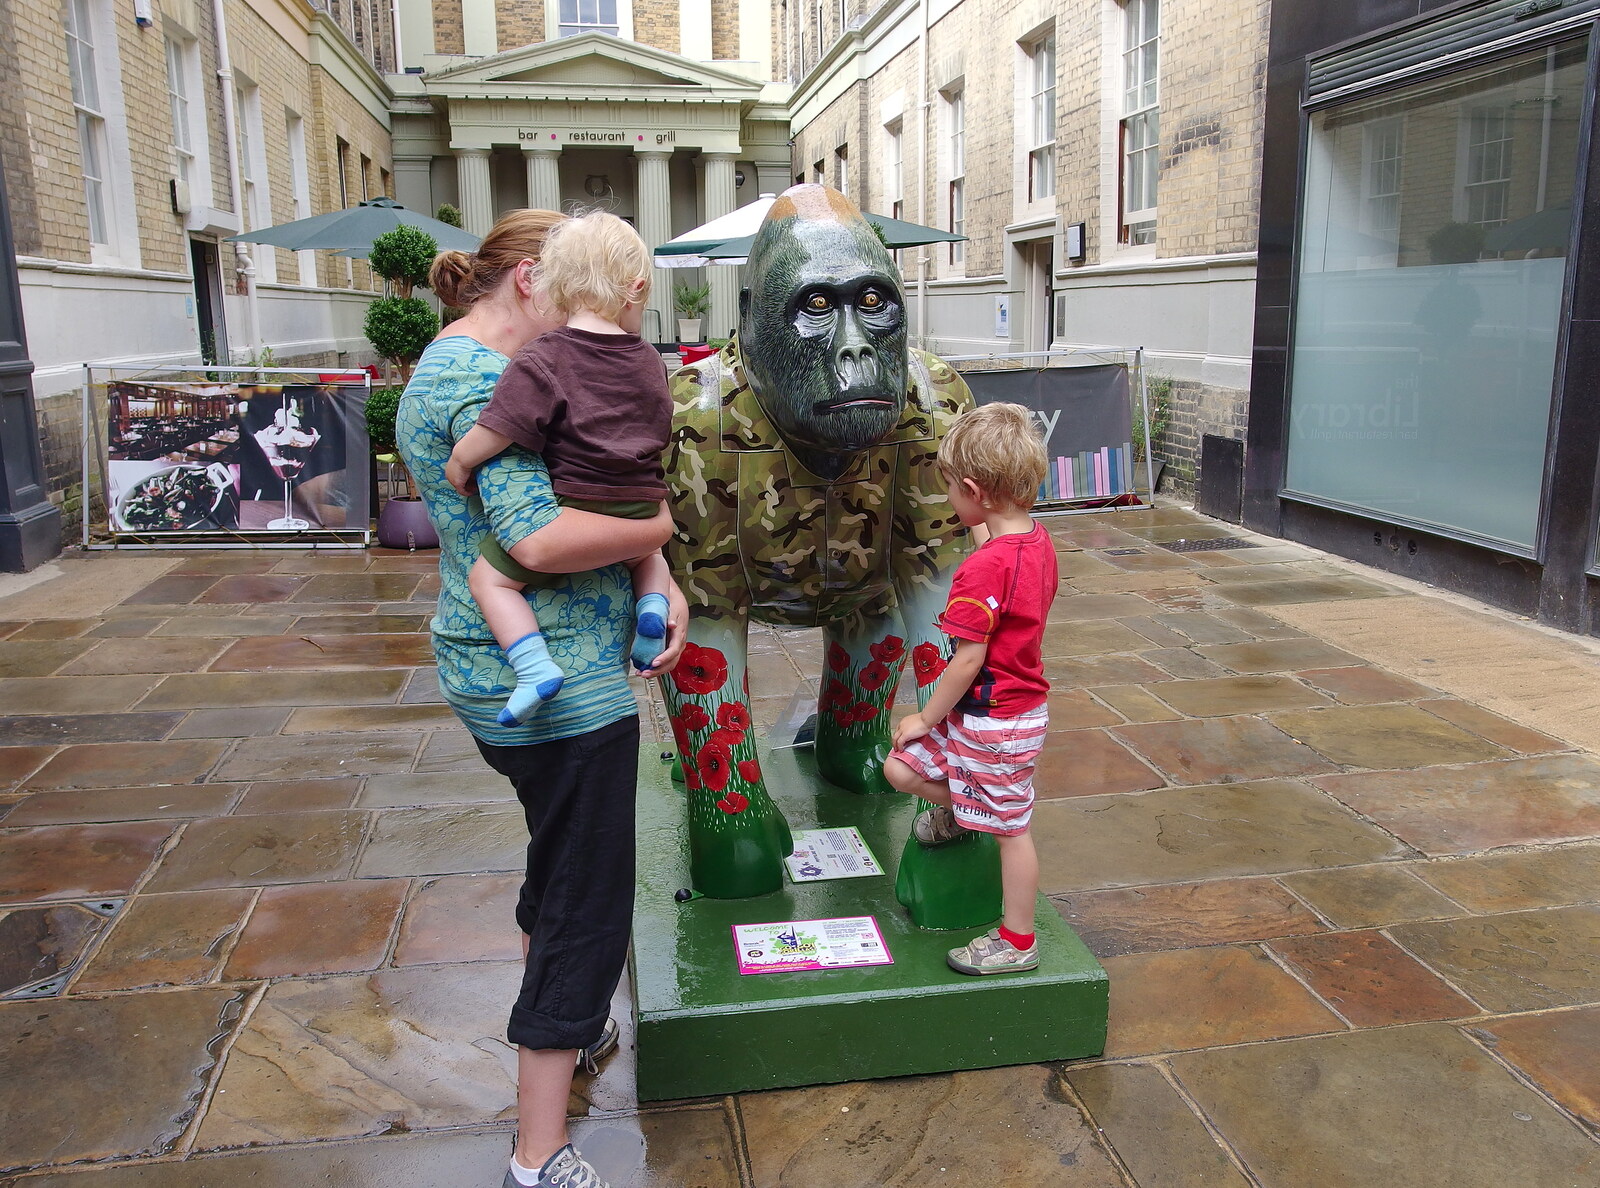 The gang and the gorilla from The Gorillas of Norwich, Norfolk - 5th August 2013